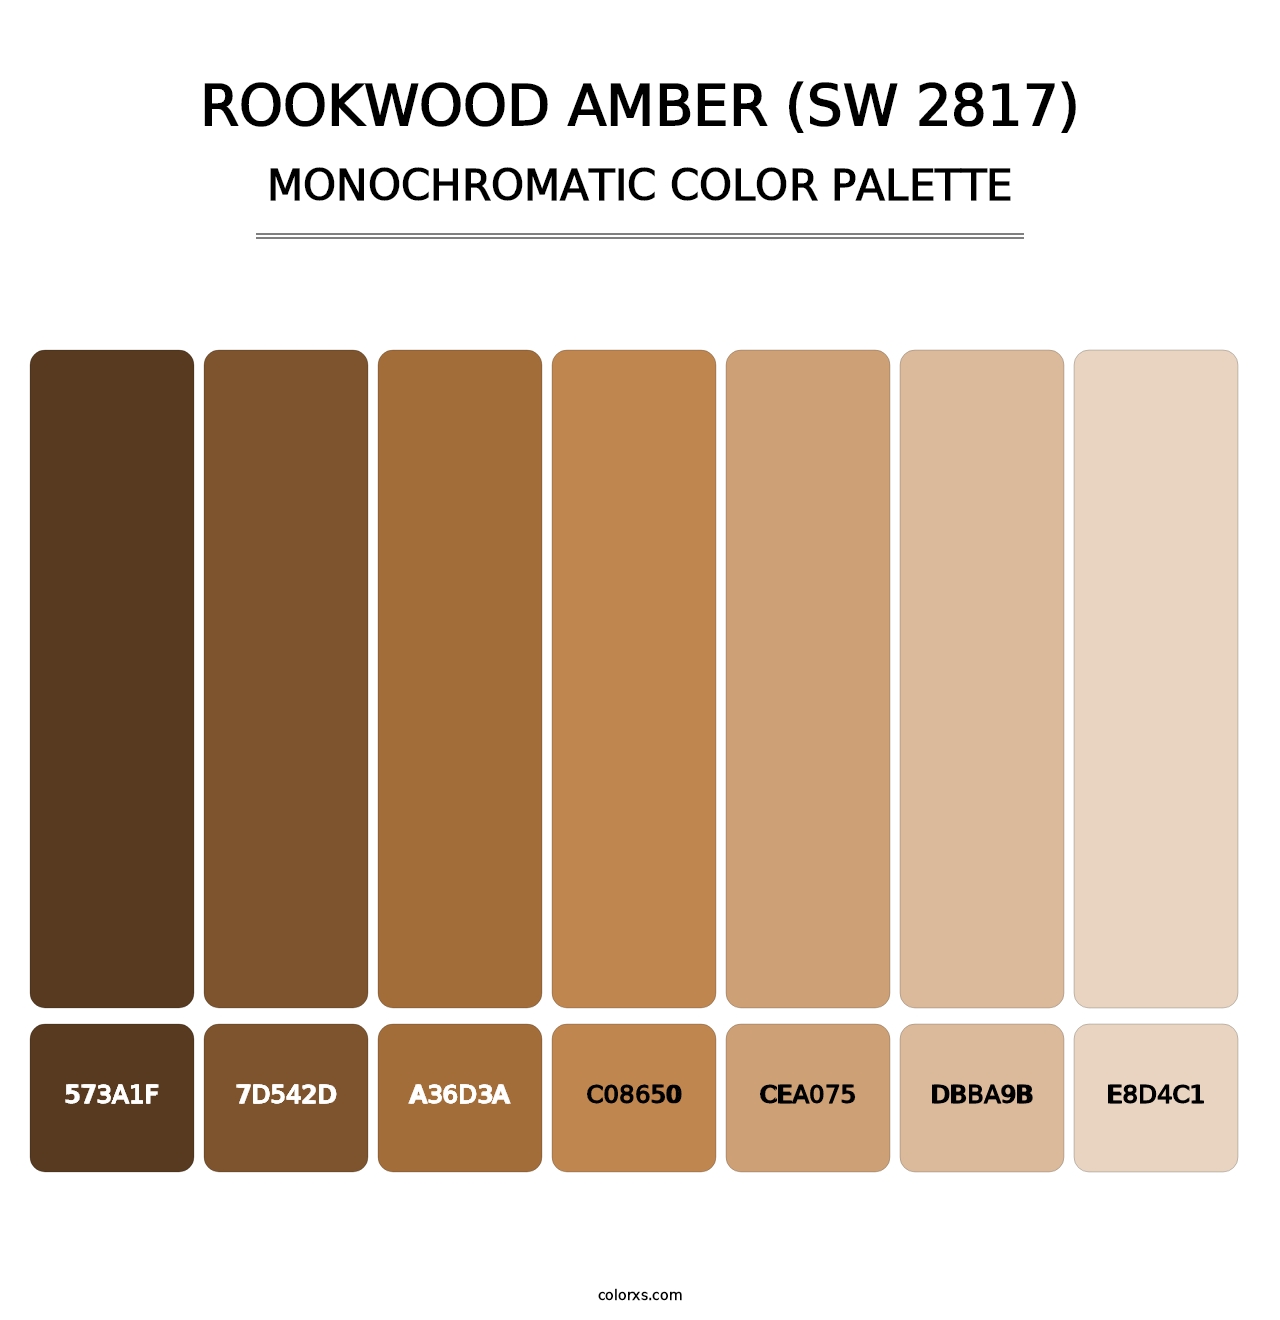 Rookwood Amber (SW 2817) - Monochromatic Color Palette